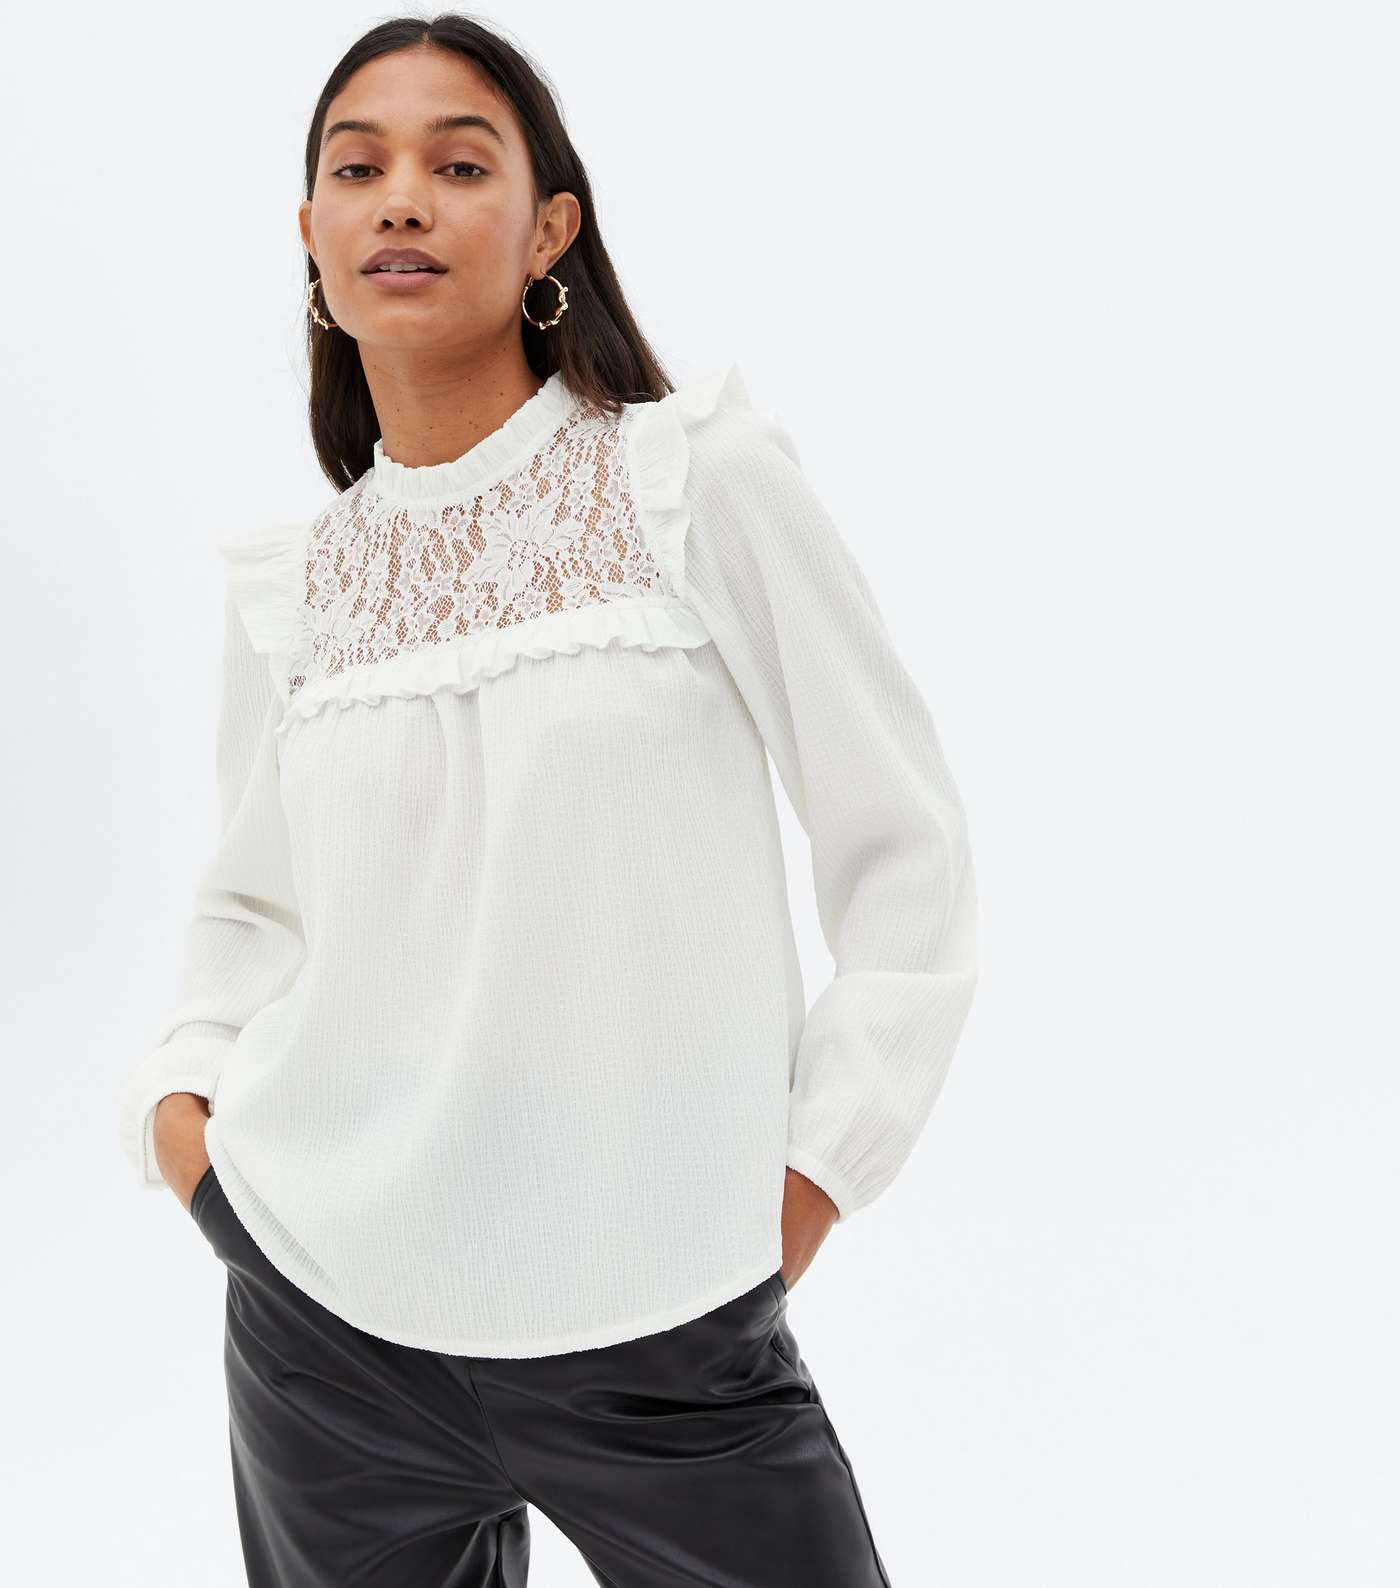 Off White Textured Lace Yoke Frill High Neck Blouse Image 3